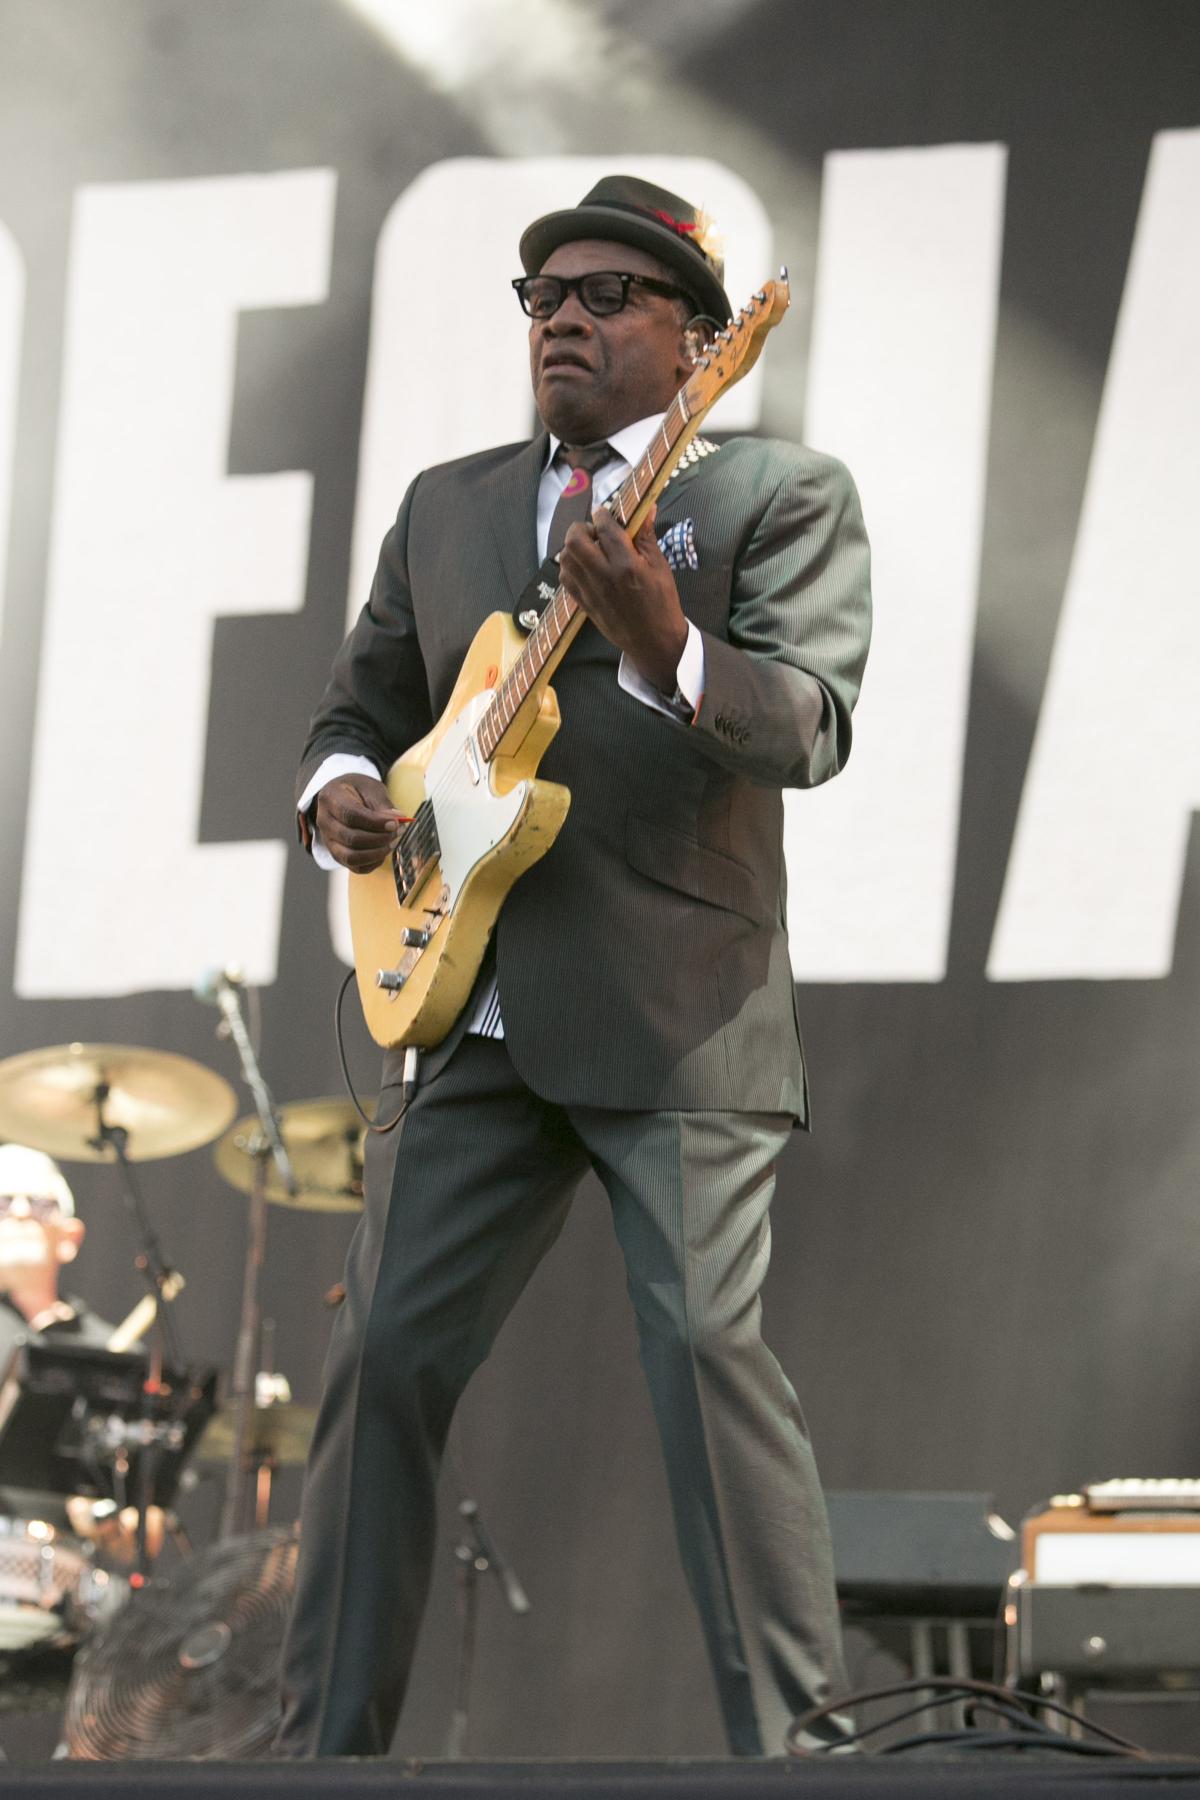 The Specials. Picture by www.rockstarimages.co.uk